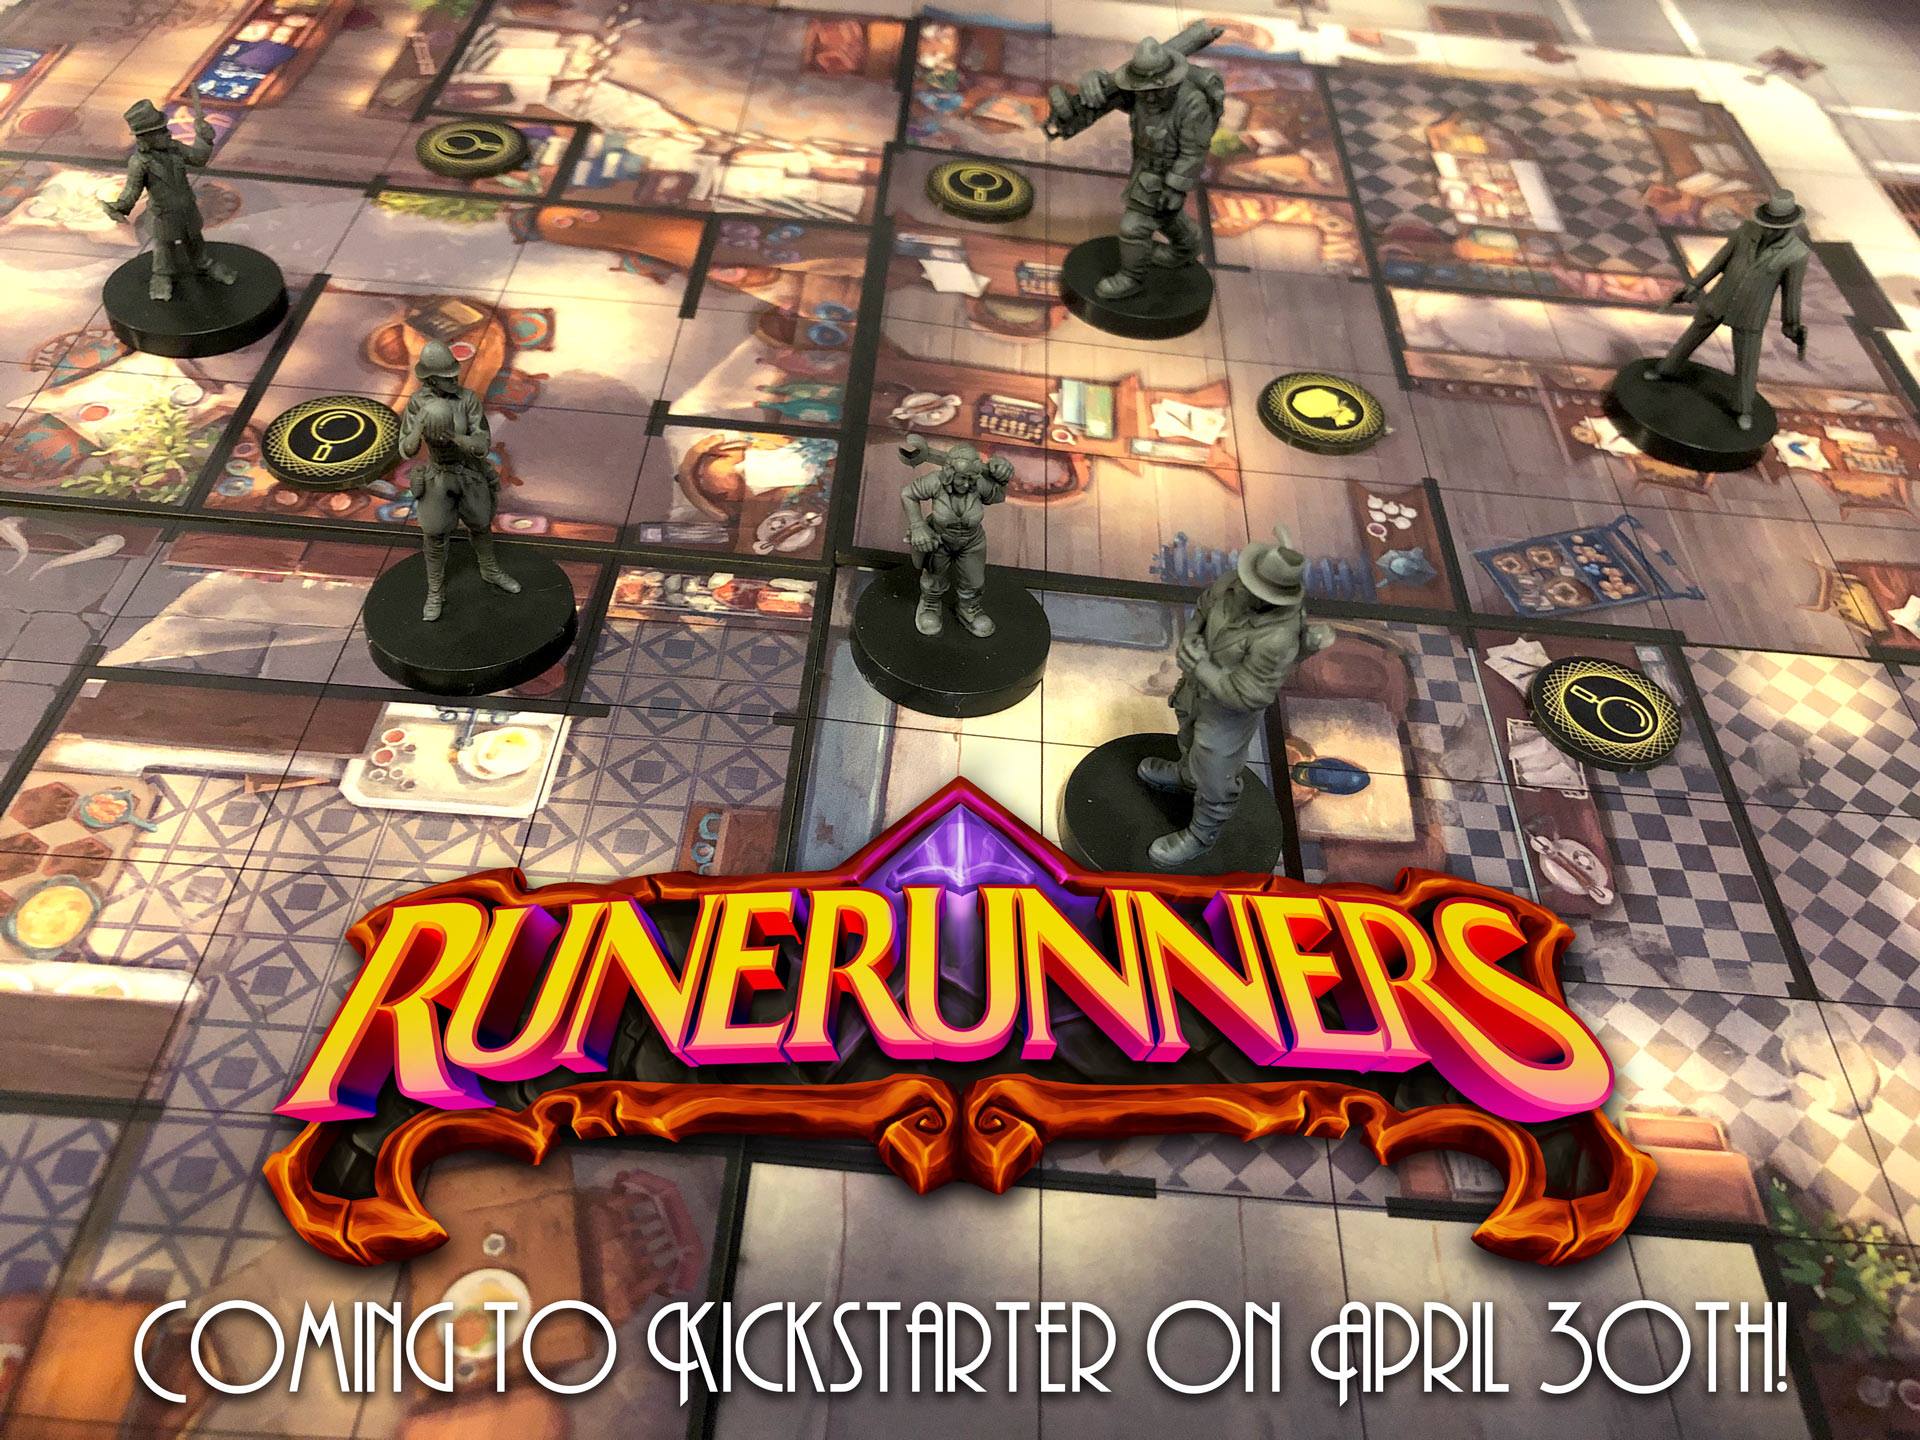 Runerunners is coming to Kickstarter on April 30th!